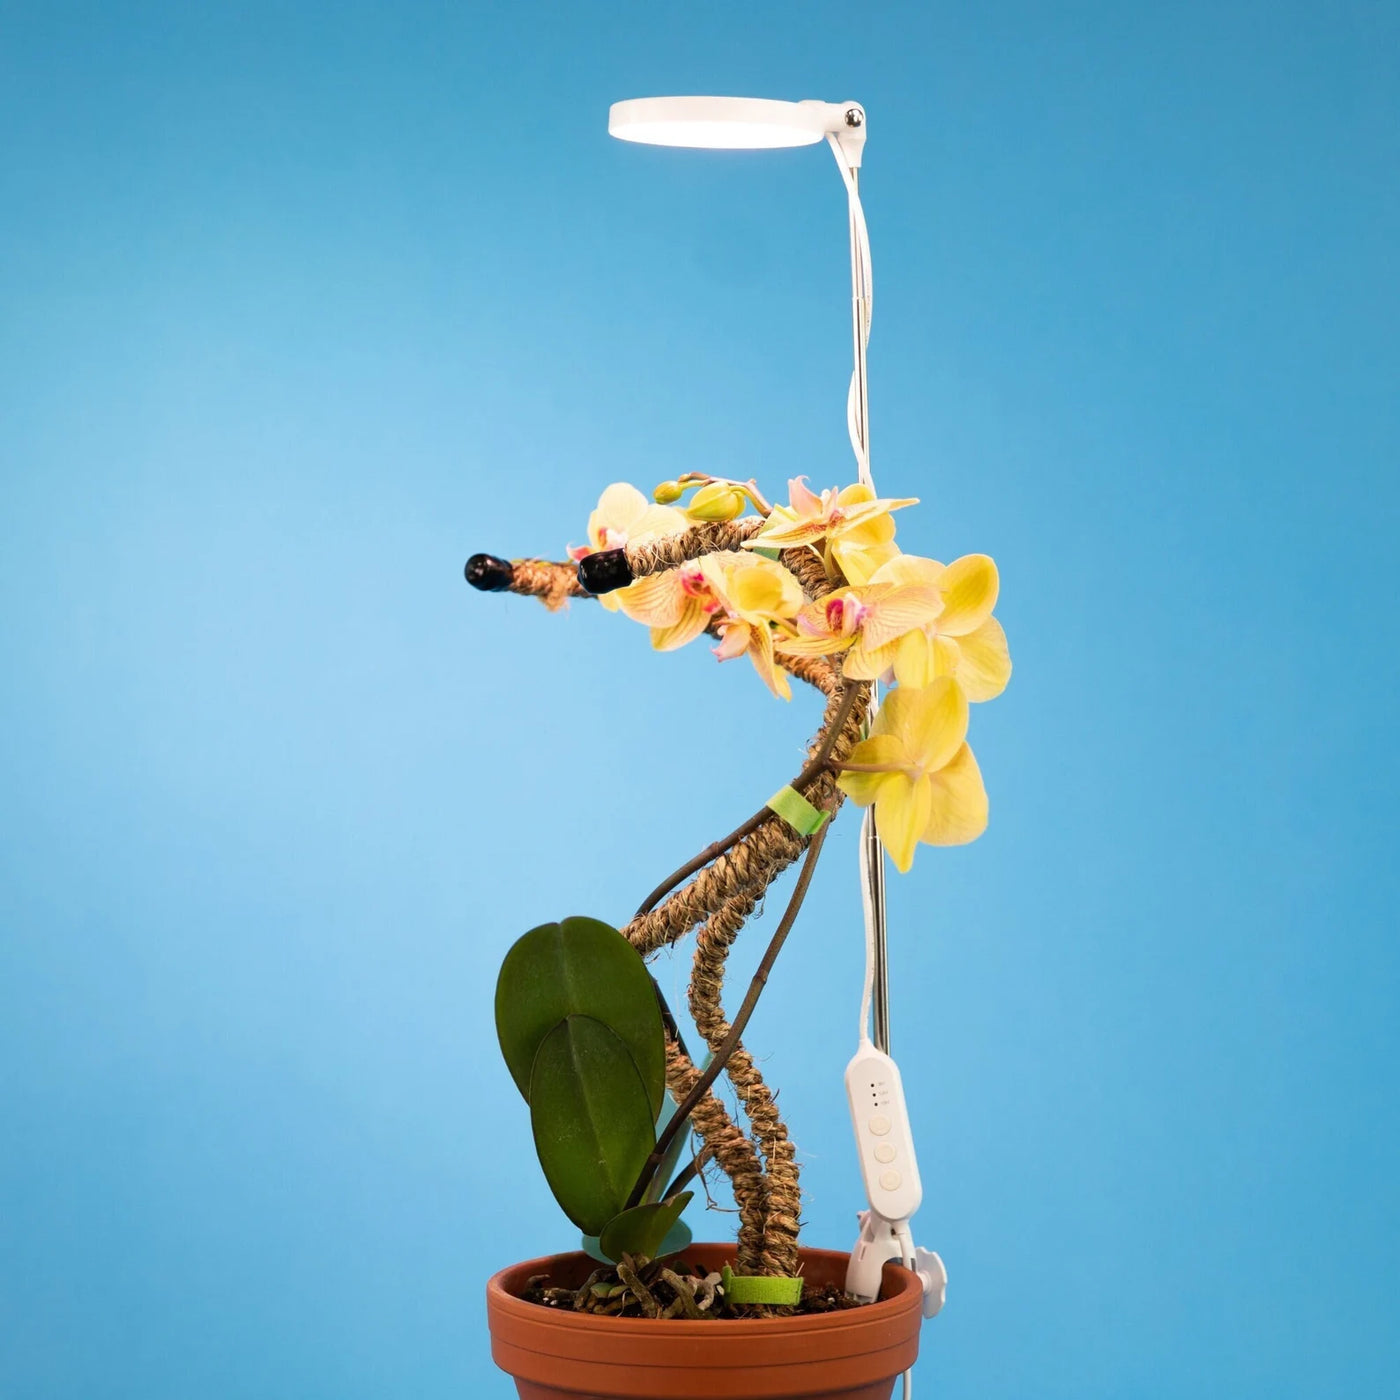 Adjustable LED Plant Light with Orchid and moss pole